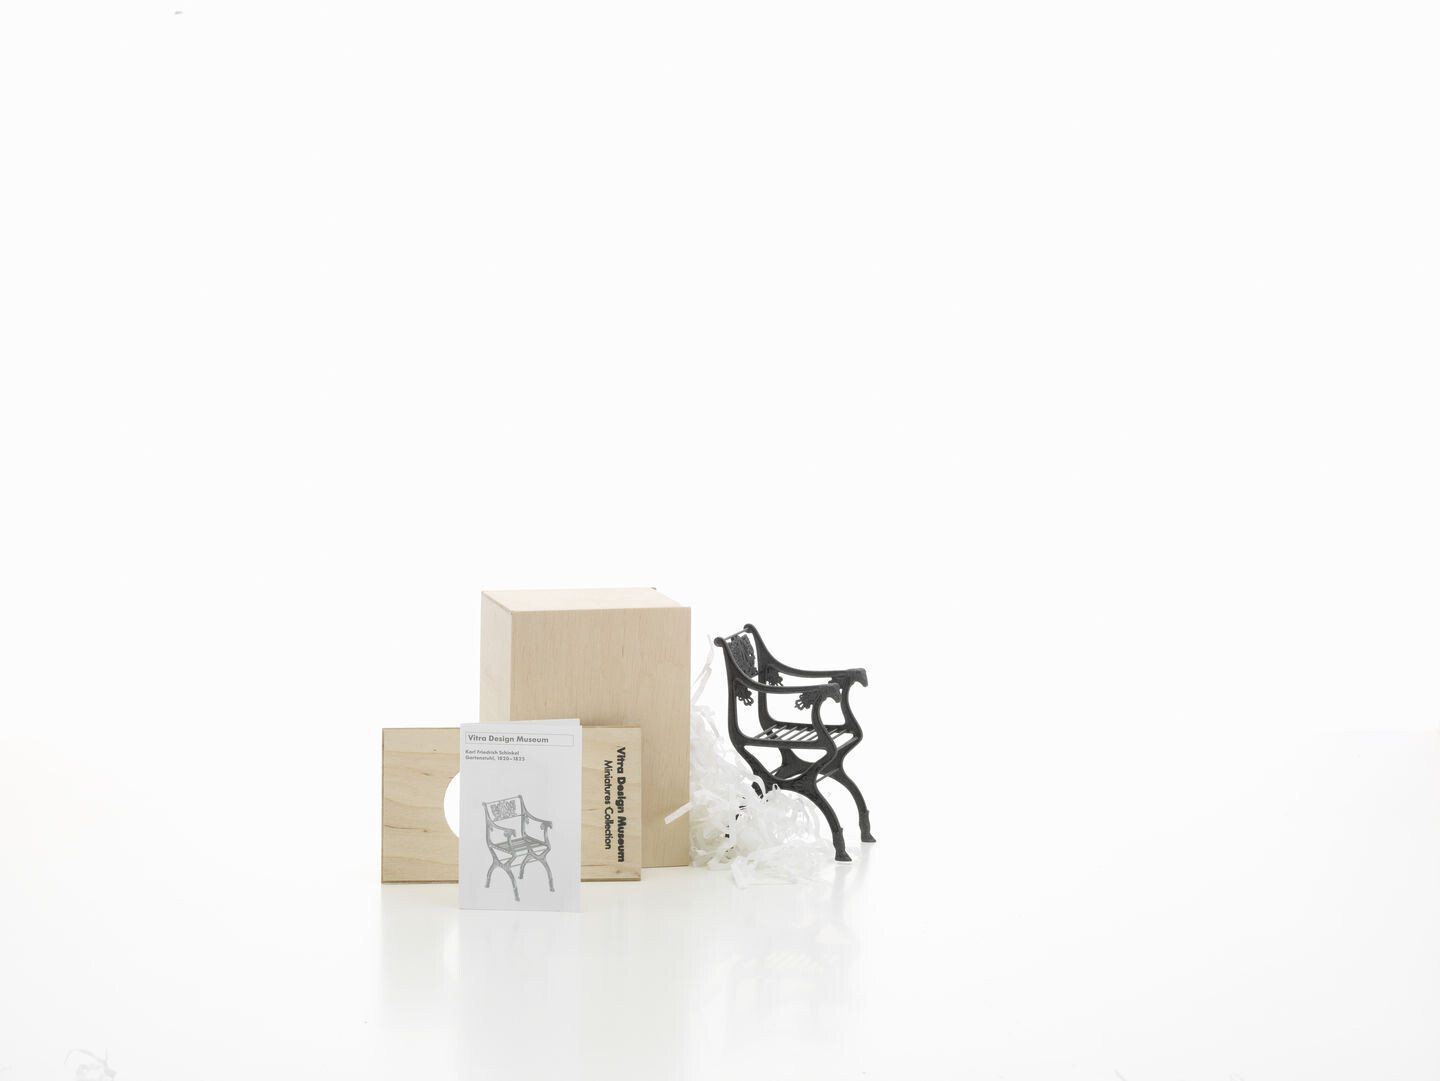 Vitra Miniatures Collection